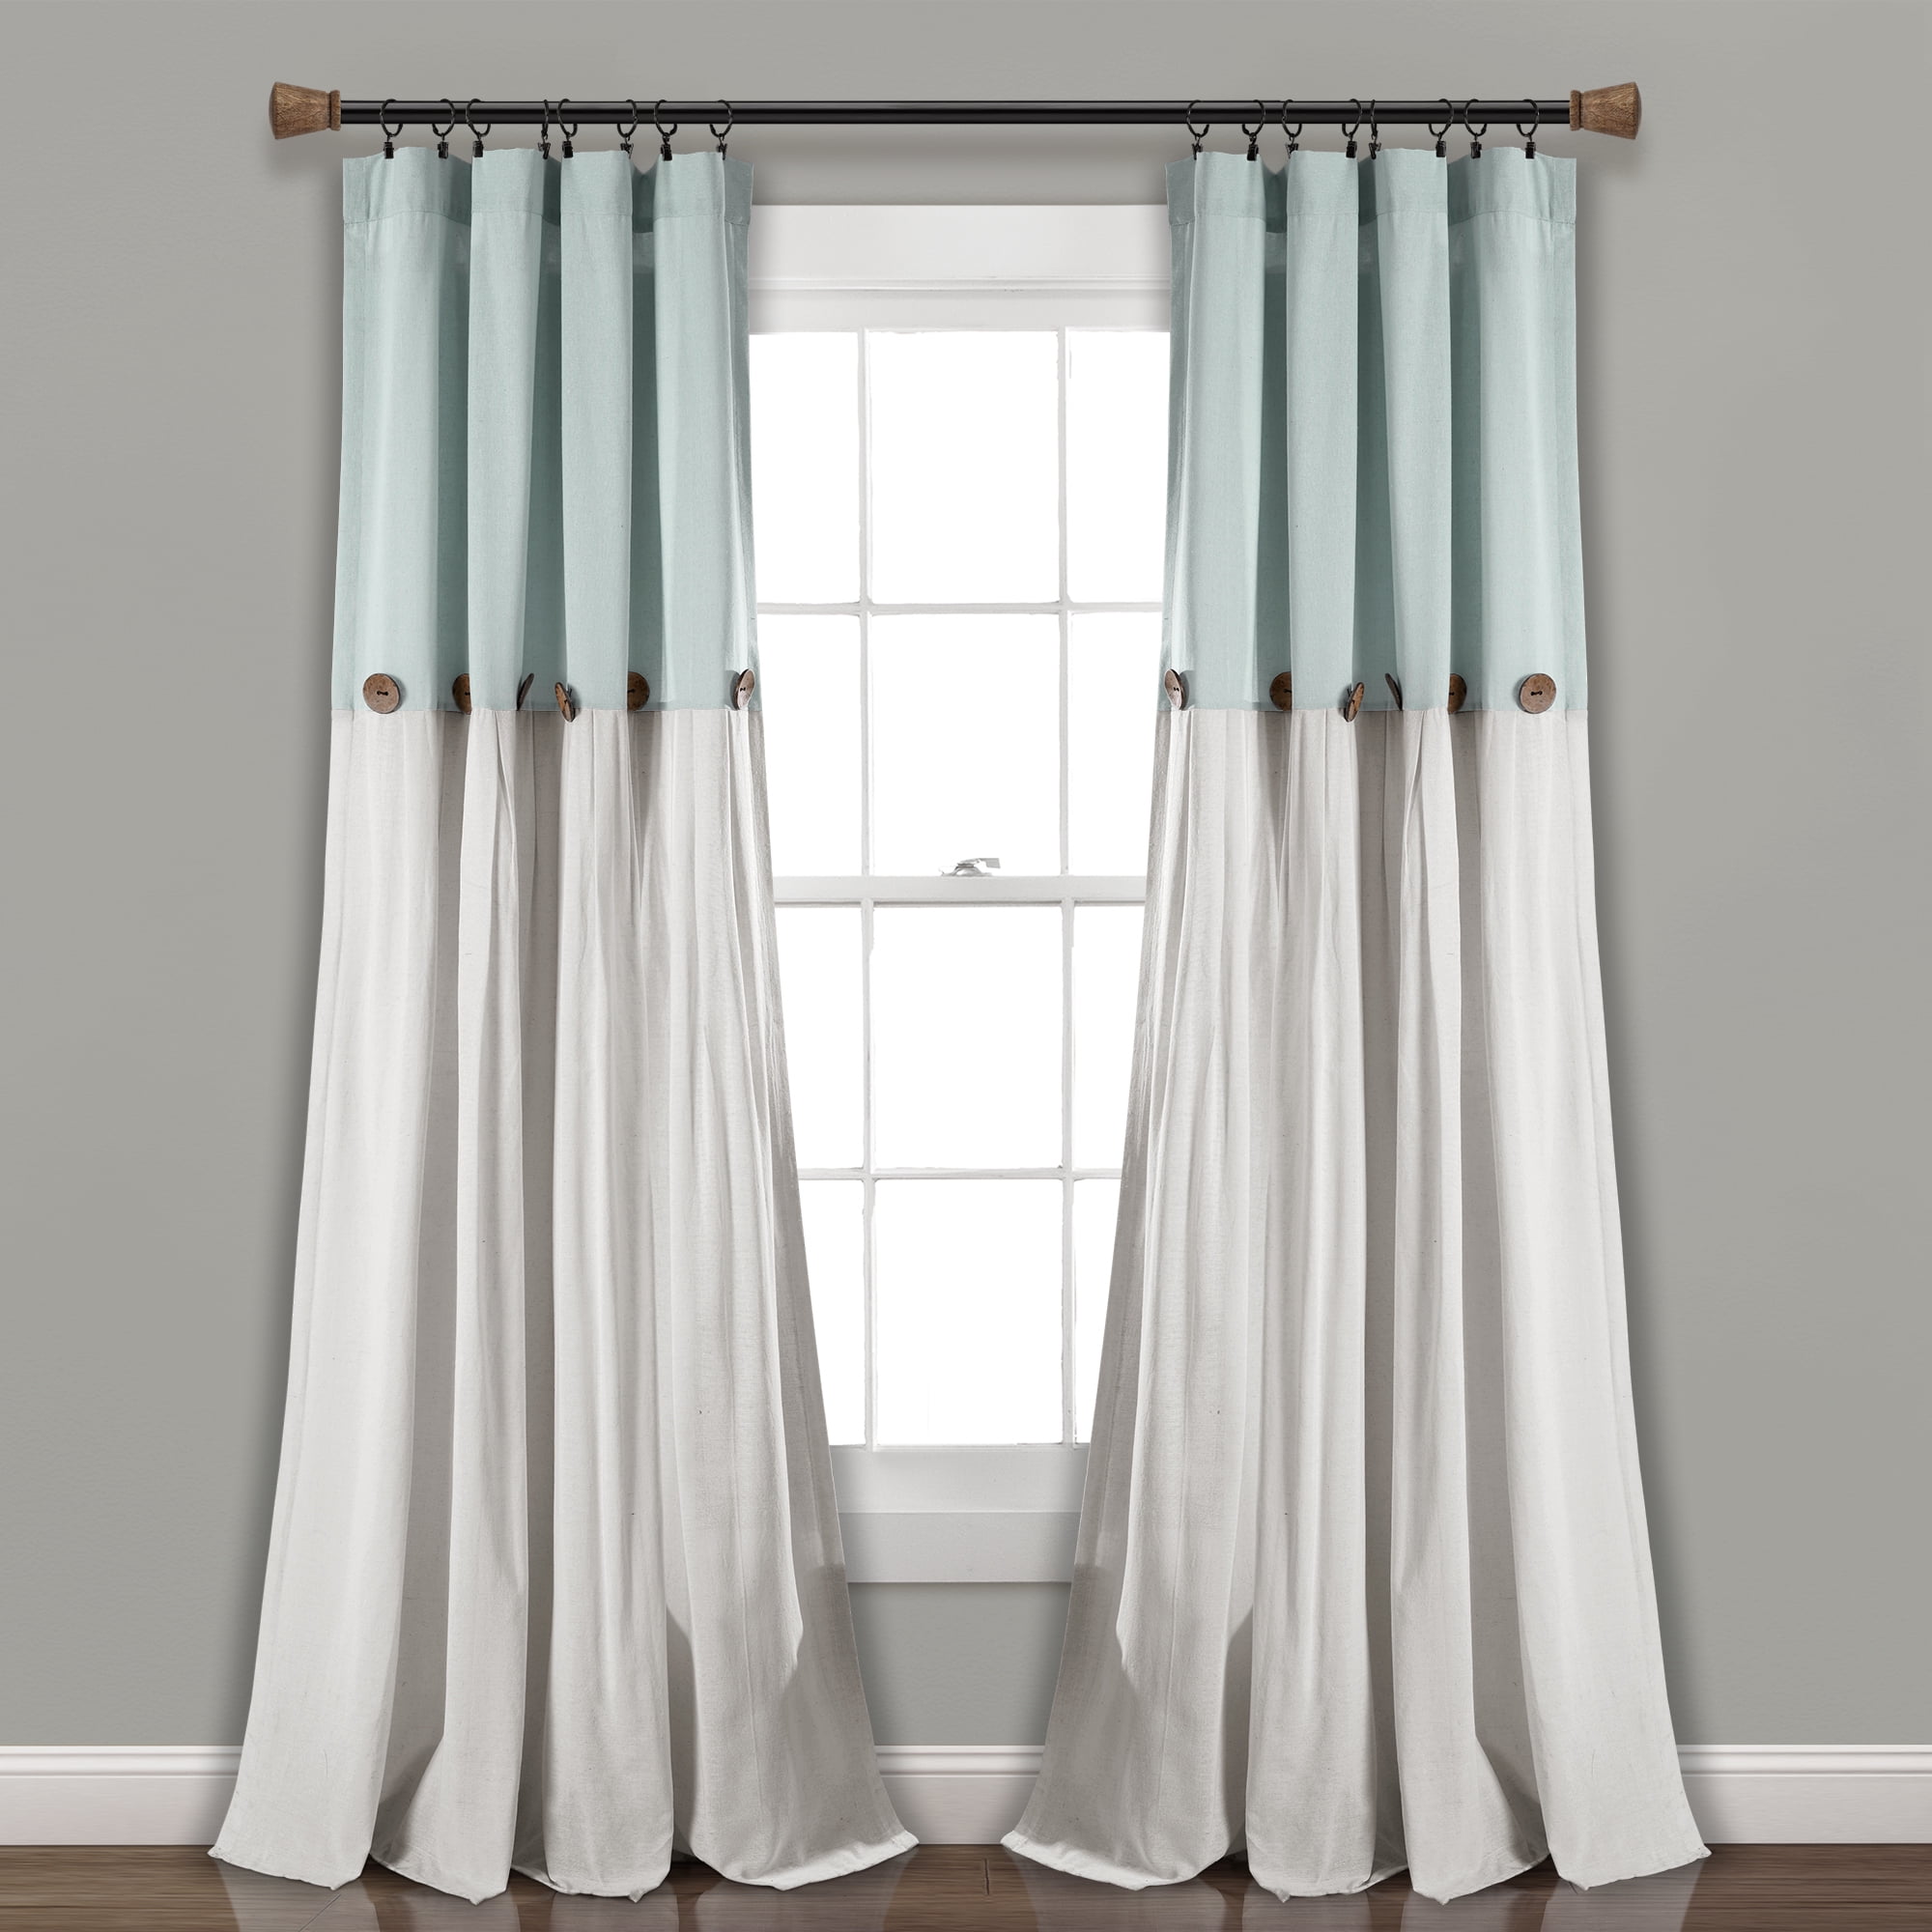 Details about   Green Curtains For Living Room Bedroom Cotton Linen Boho Window Drape Treatment 